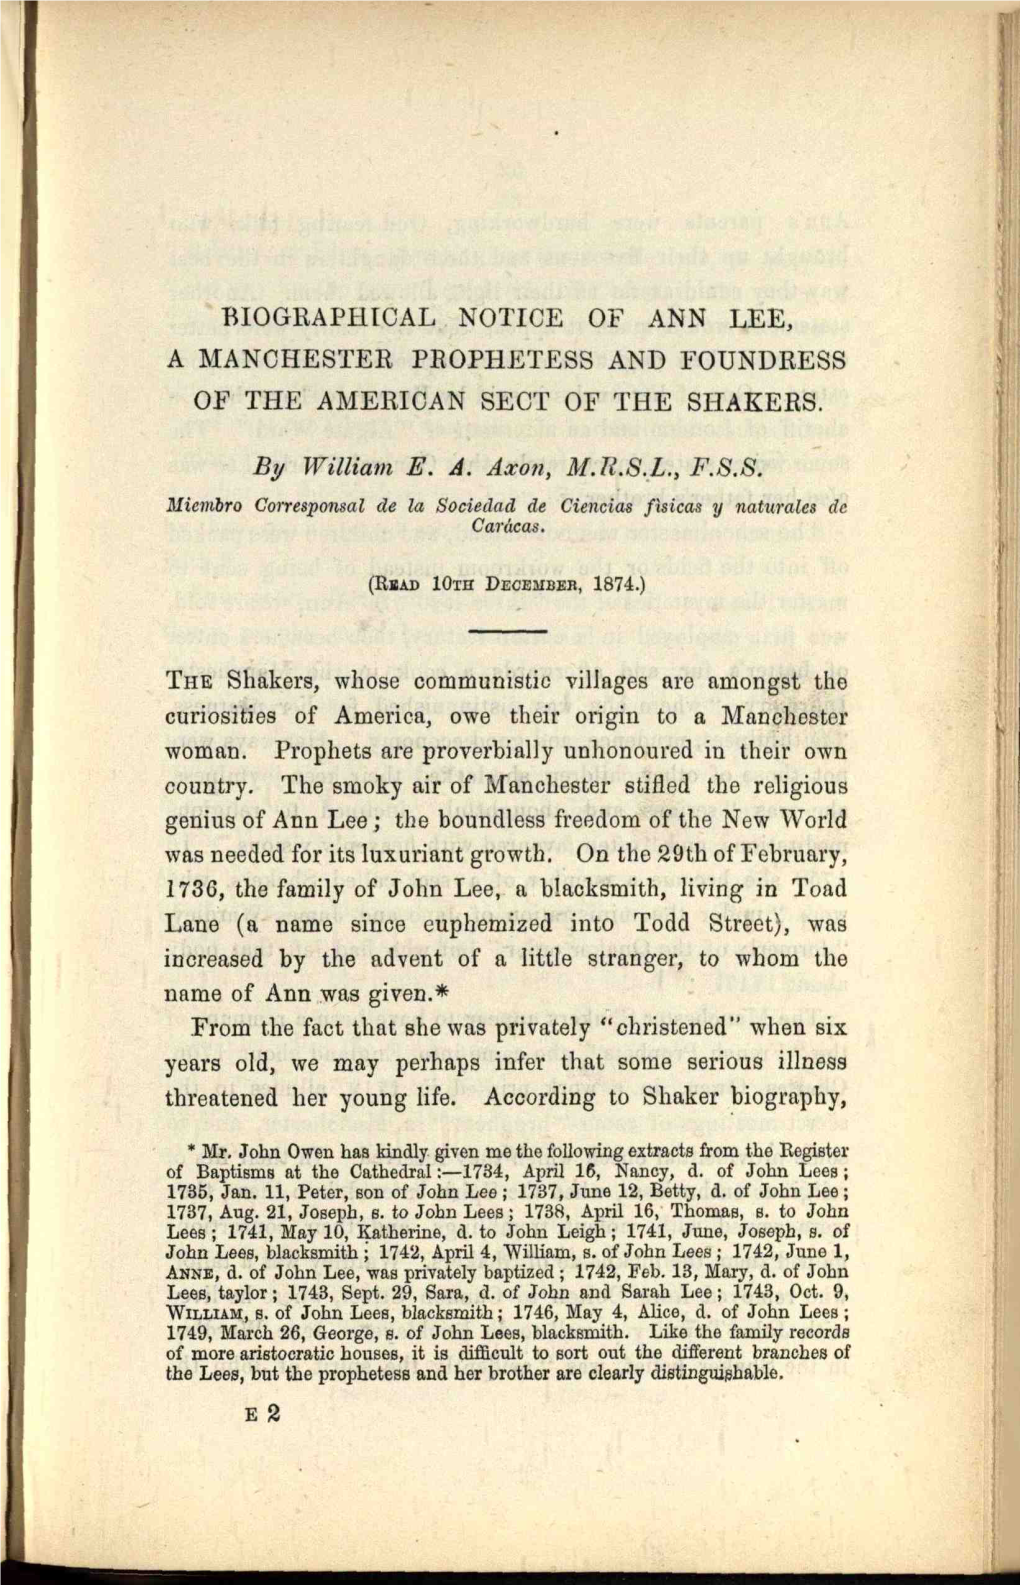 Biographical Notice of Ann Lee, a Manchester Prophetess and Foundress of the American Sect of the Shakers